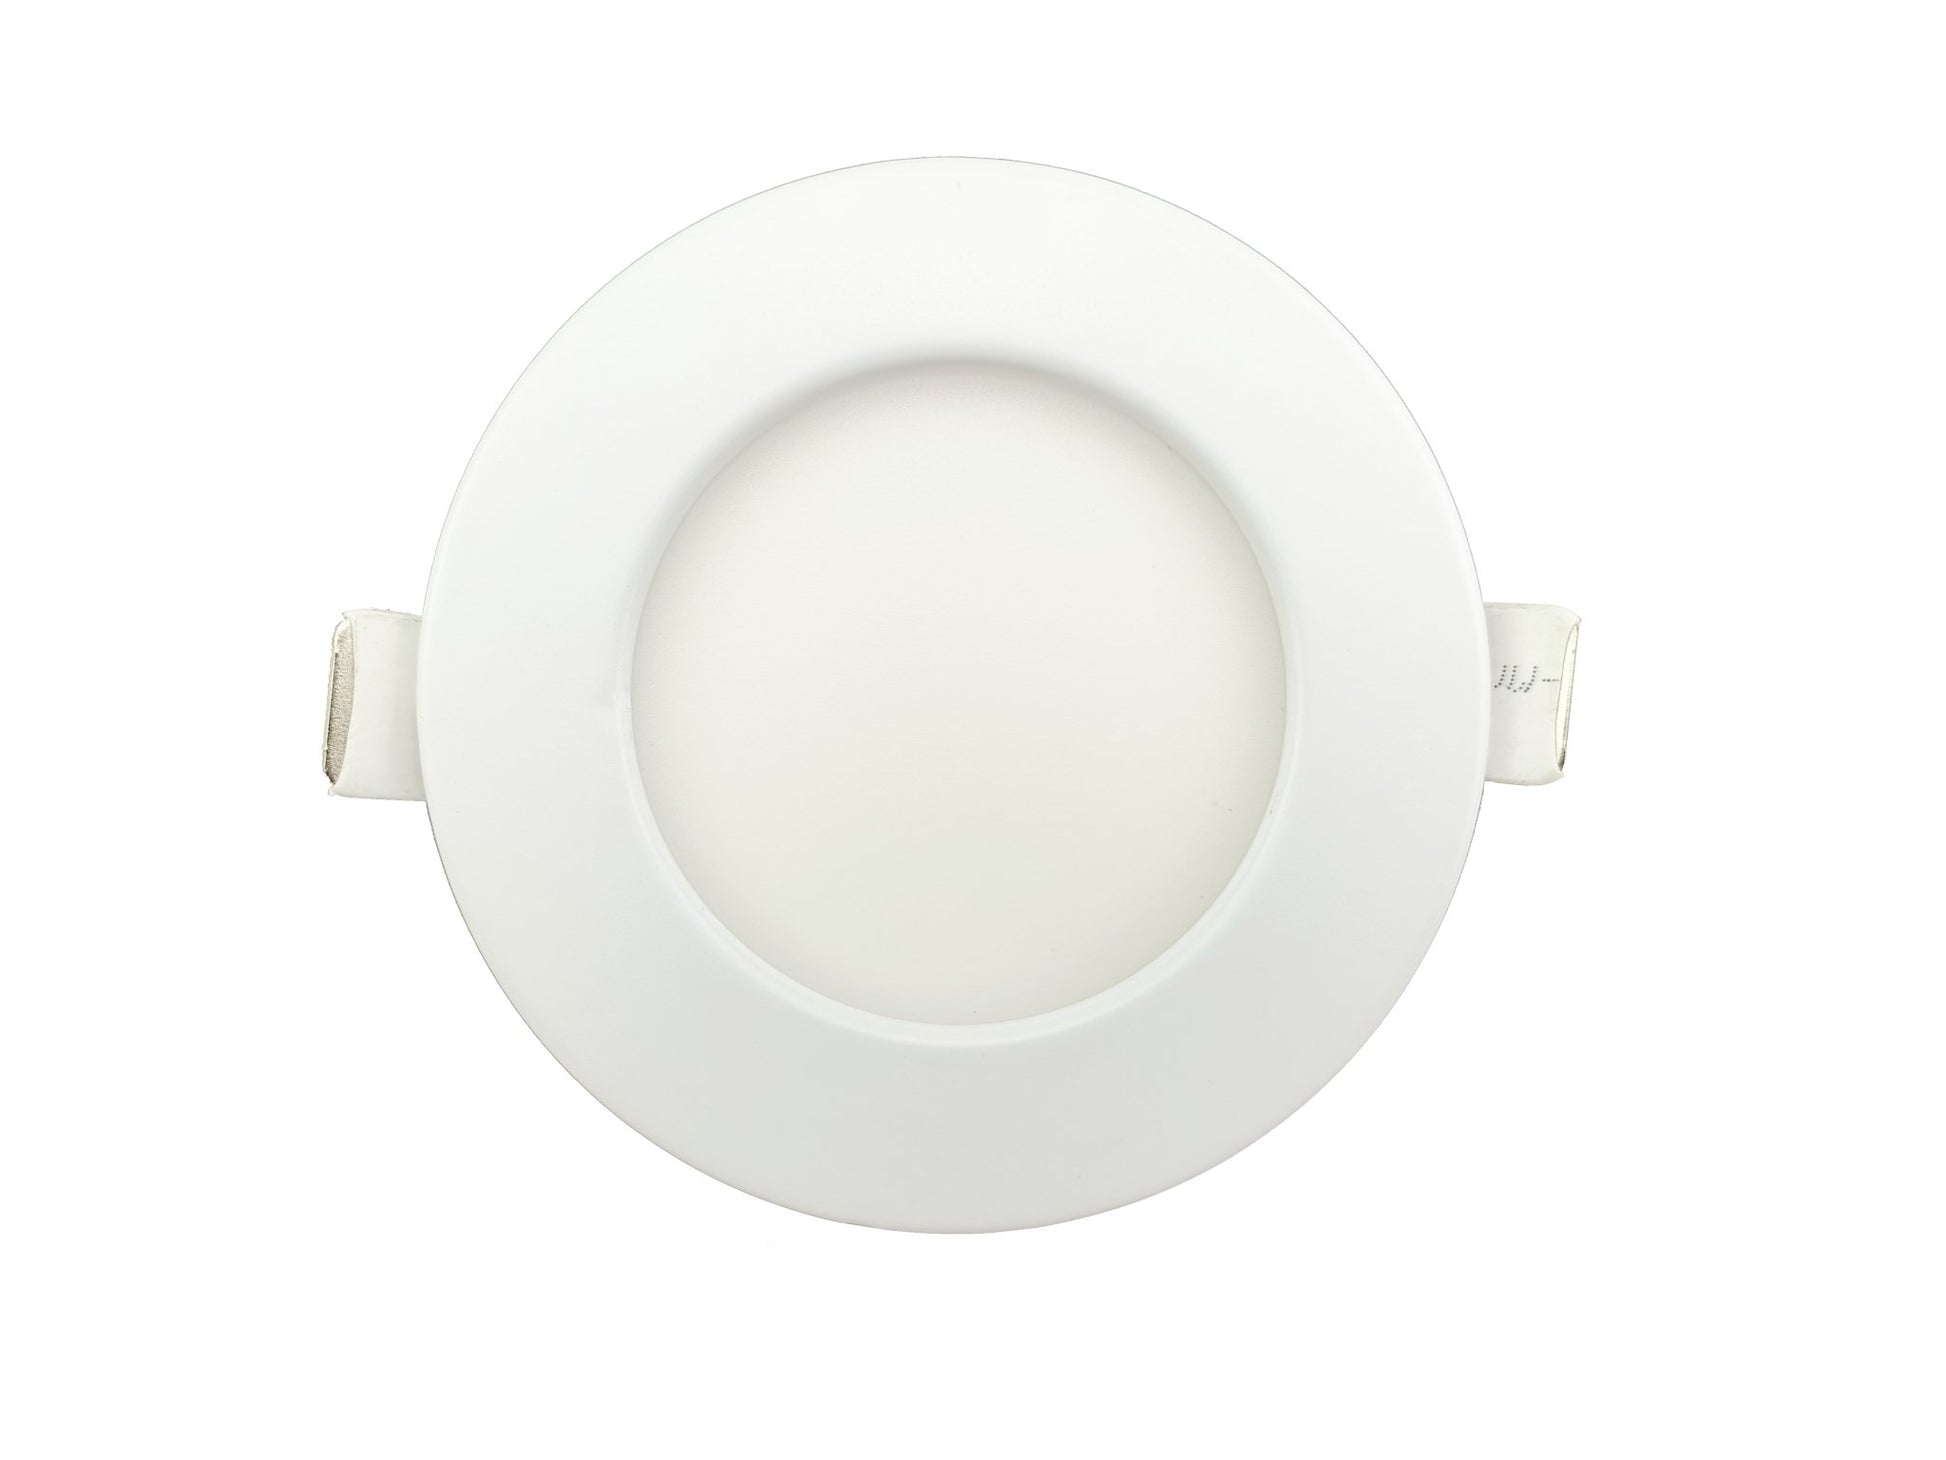 GDL-G96921Goodlite G-96921 3" 8W LED Round Recessed Slim Spotlight Selectable CCT Fire Rated